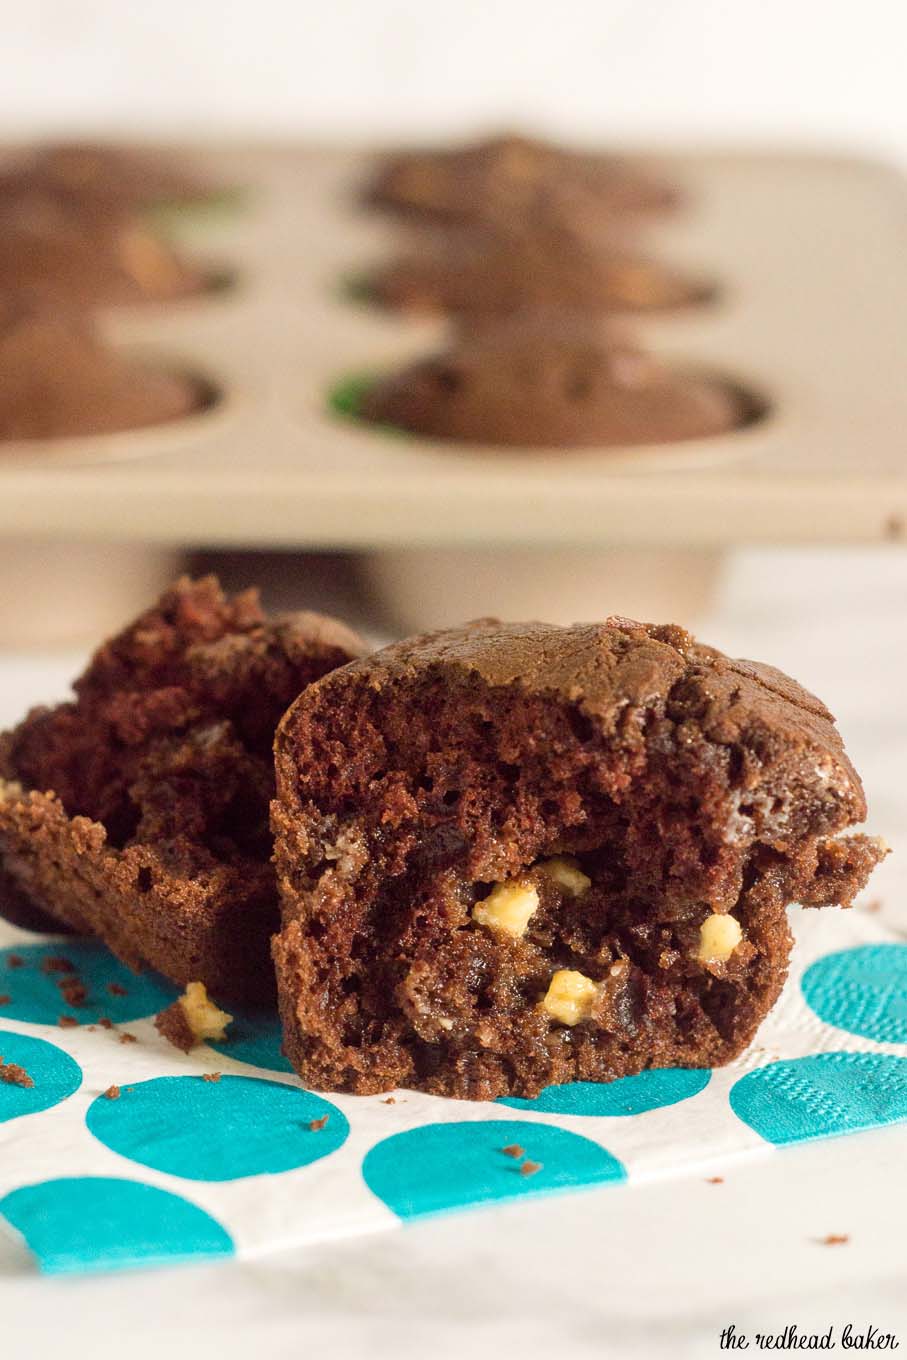 Double chocolate muffins pack a double punch -- rich semisweet chocolate in the muffin batter, and white chocolate chips mixed in. Are they for breakfast or dessert? You decide! #Choctoberfest